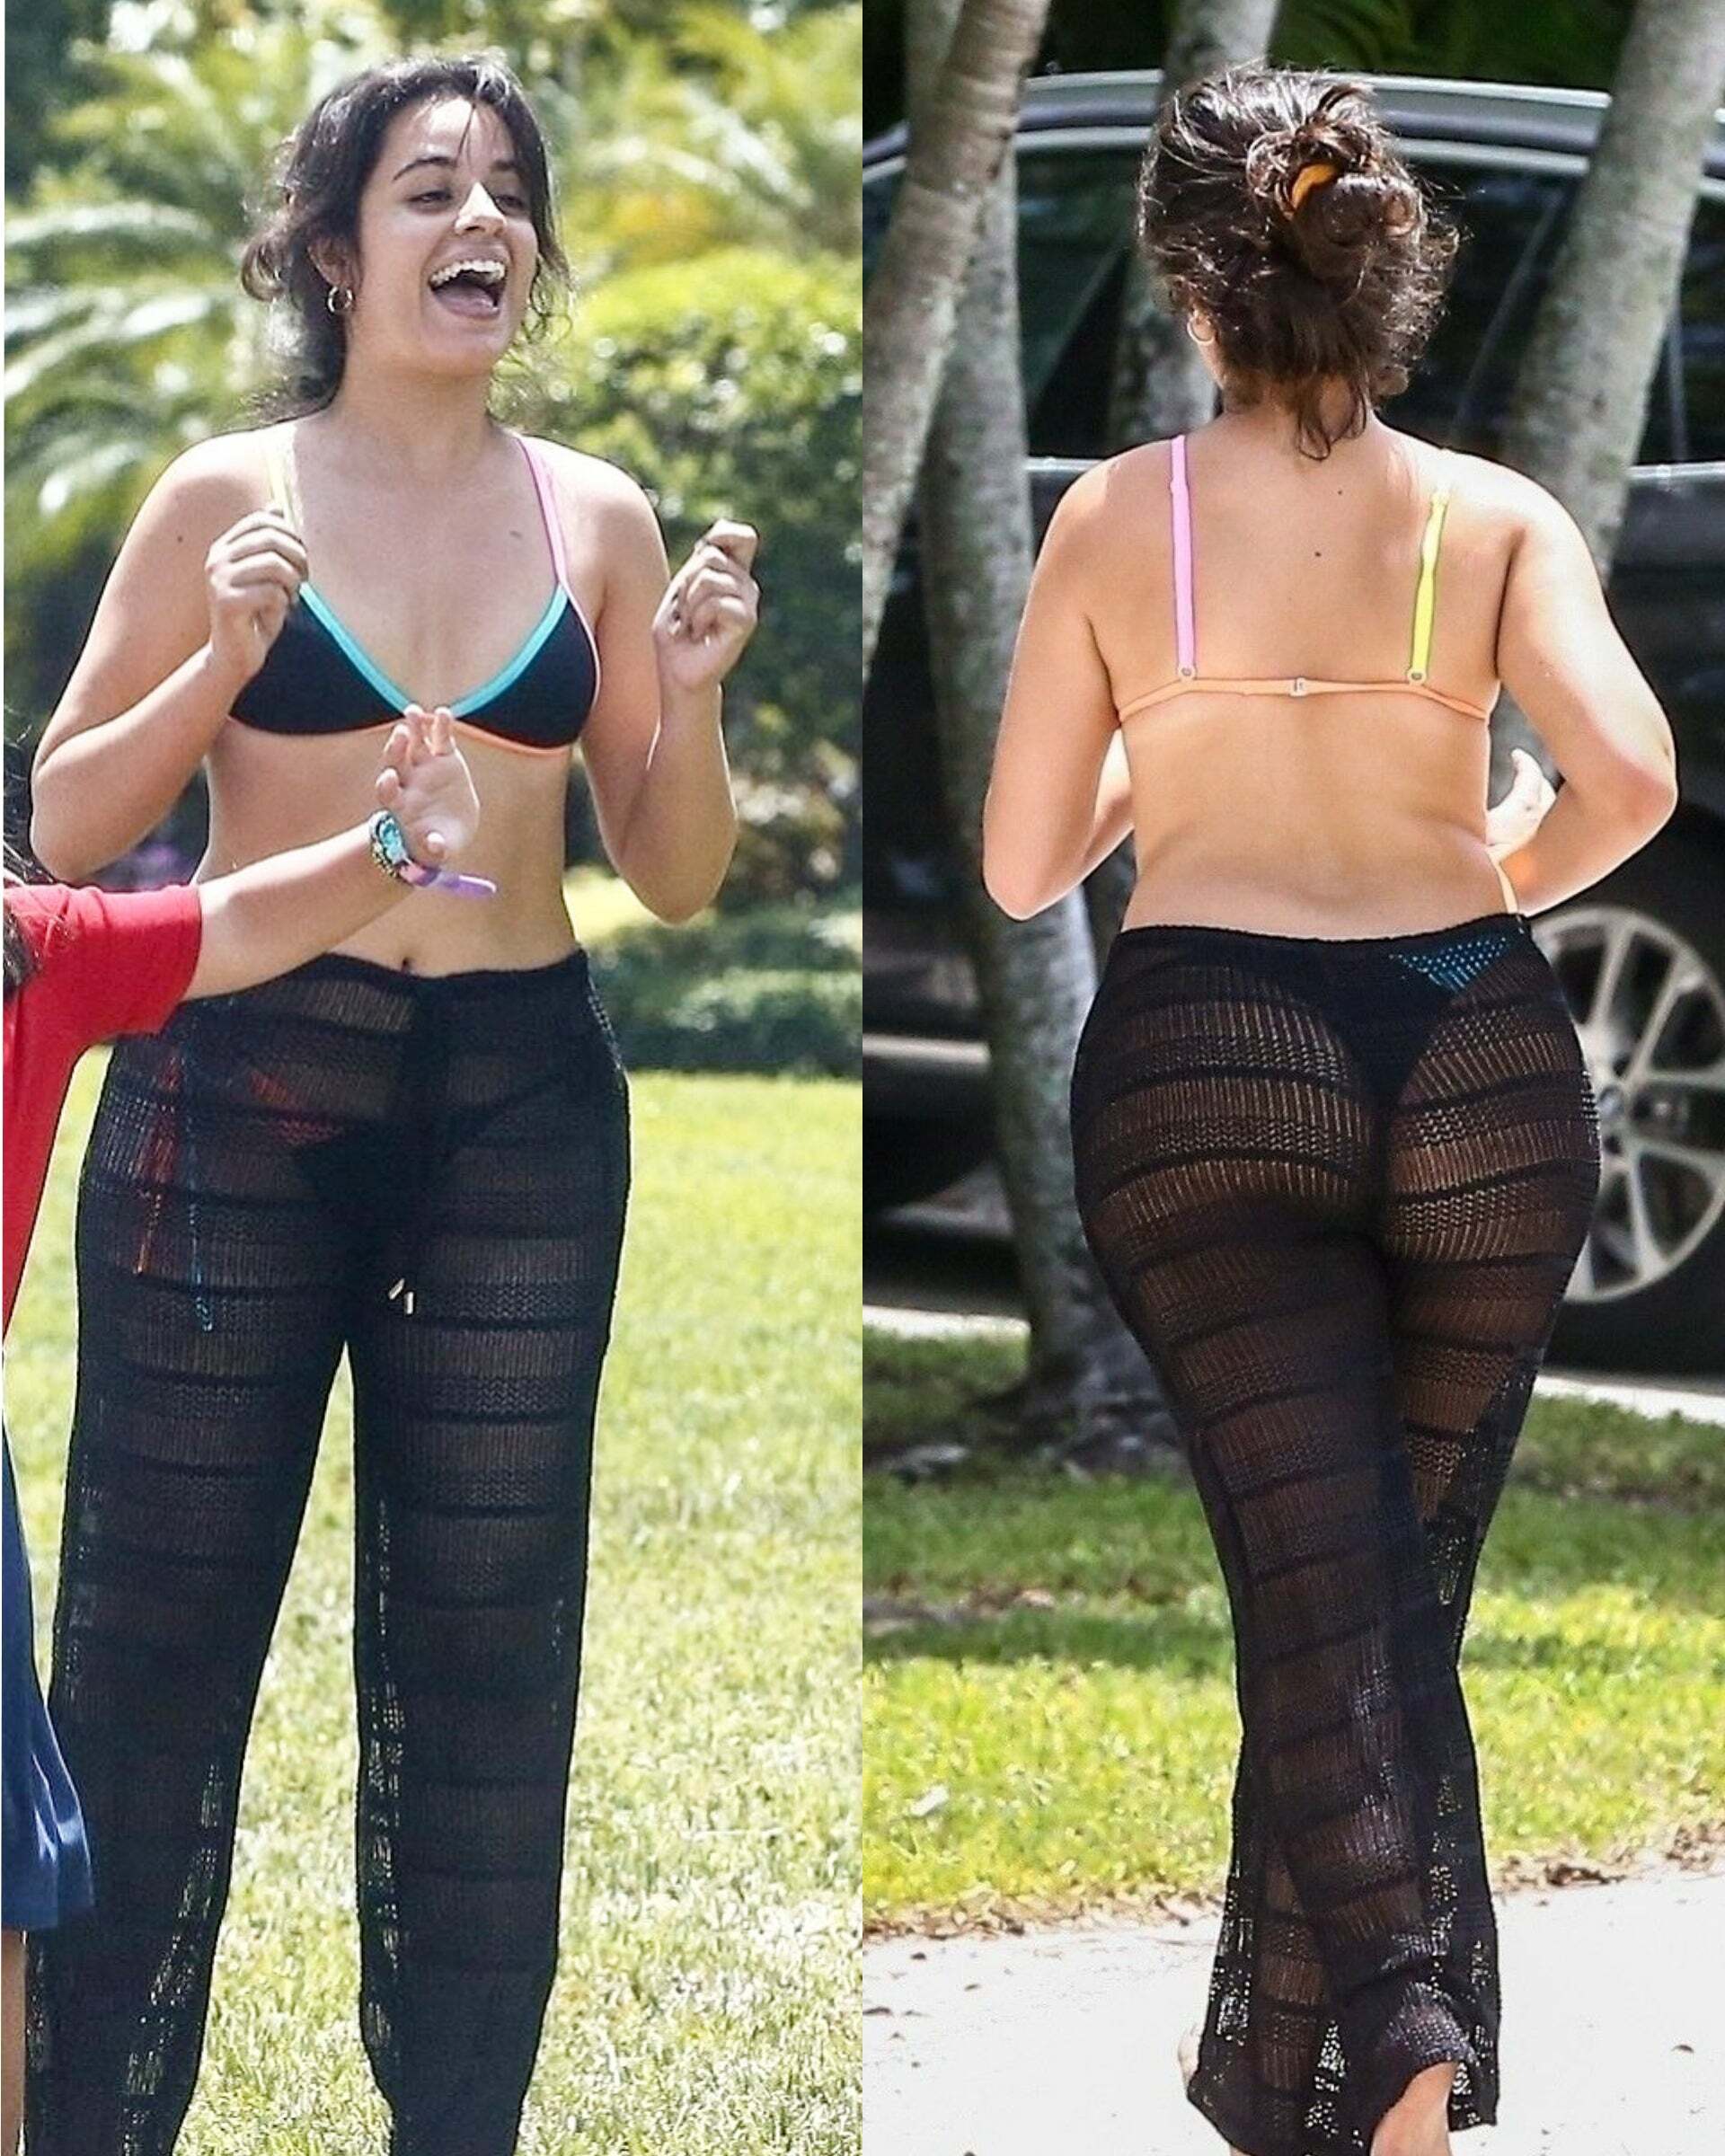 Camila cabello's fat ass needs raw hardcore pounding by big black dicks in doggy style